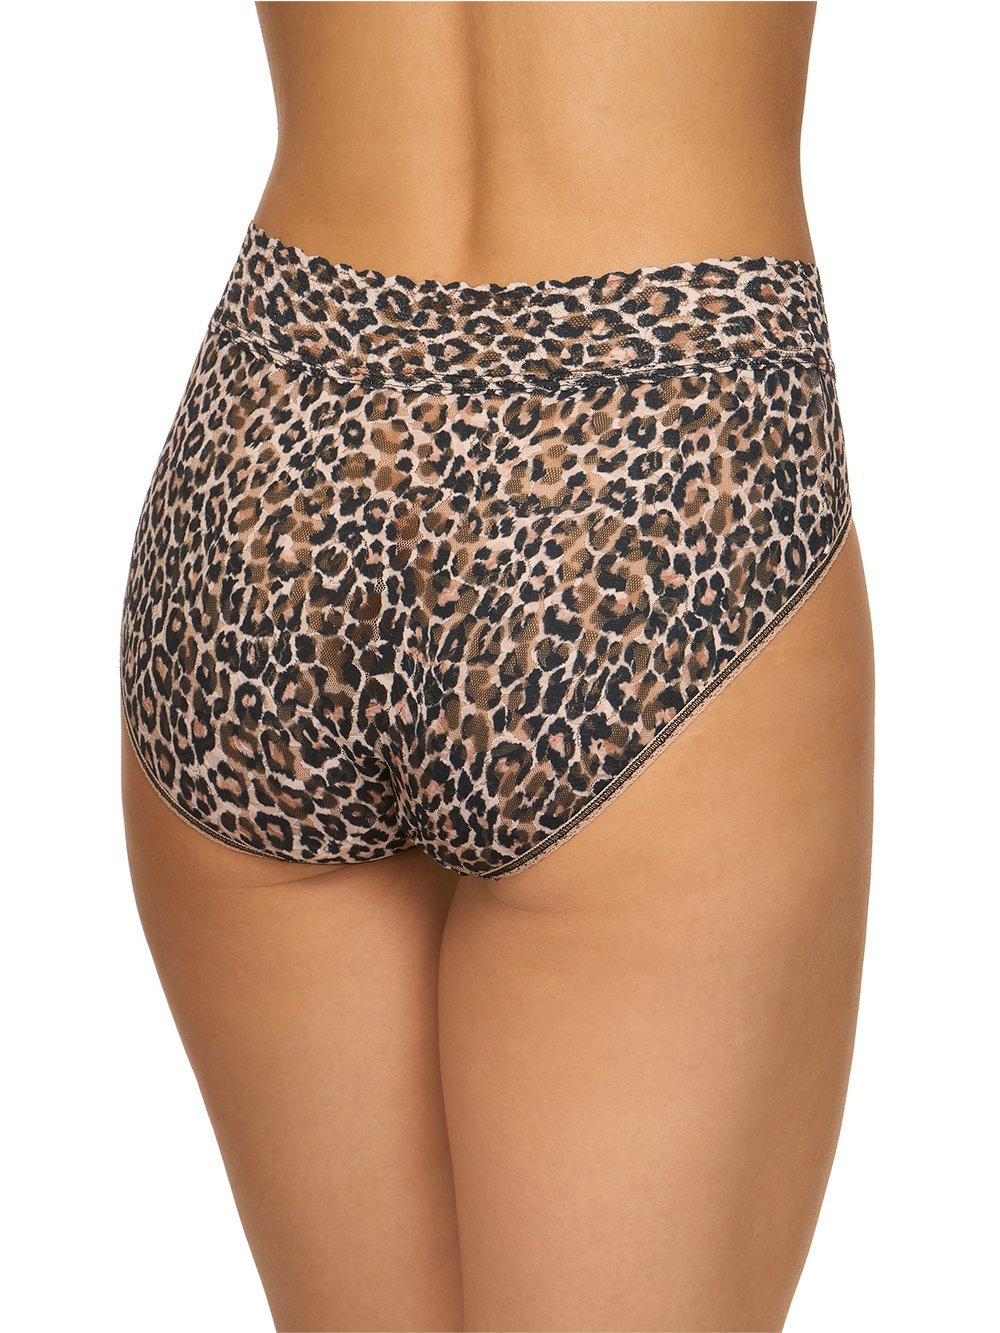 Hanky Panky Panty Classic Leopard French Brief